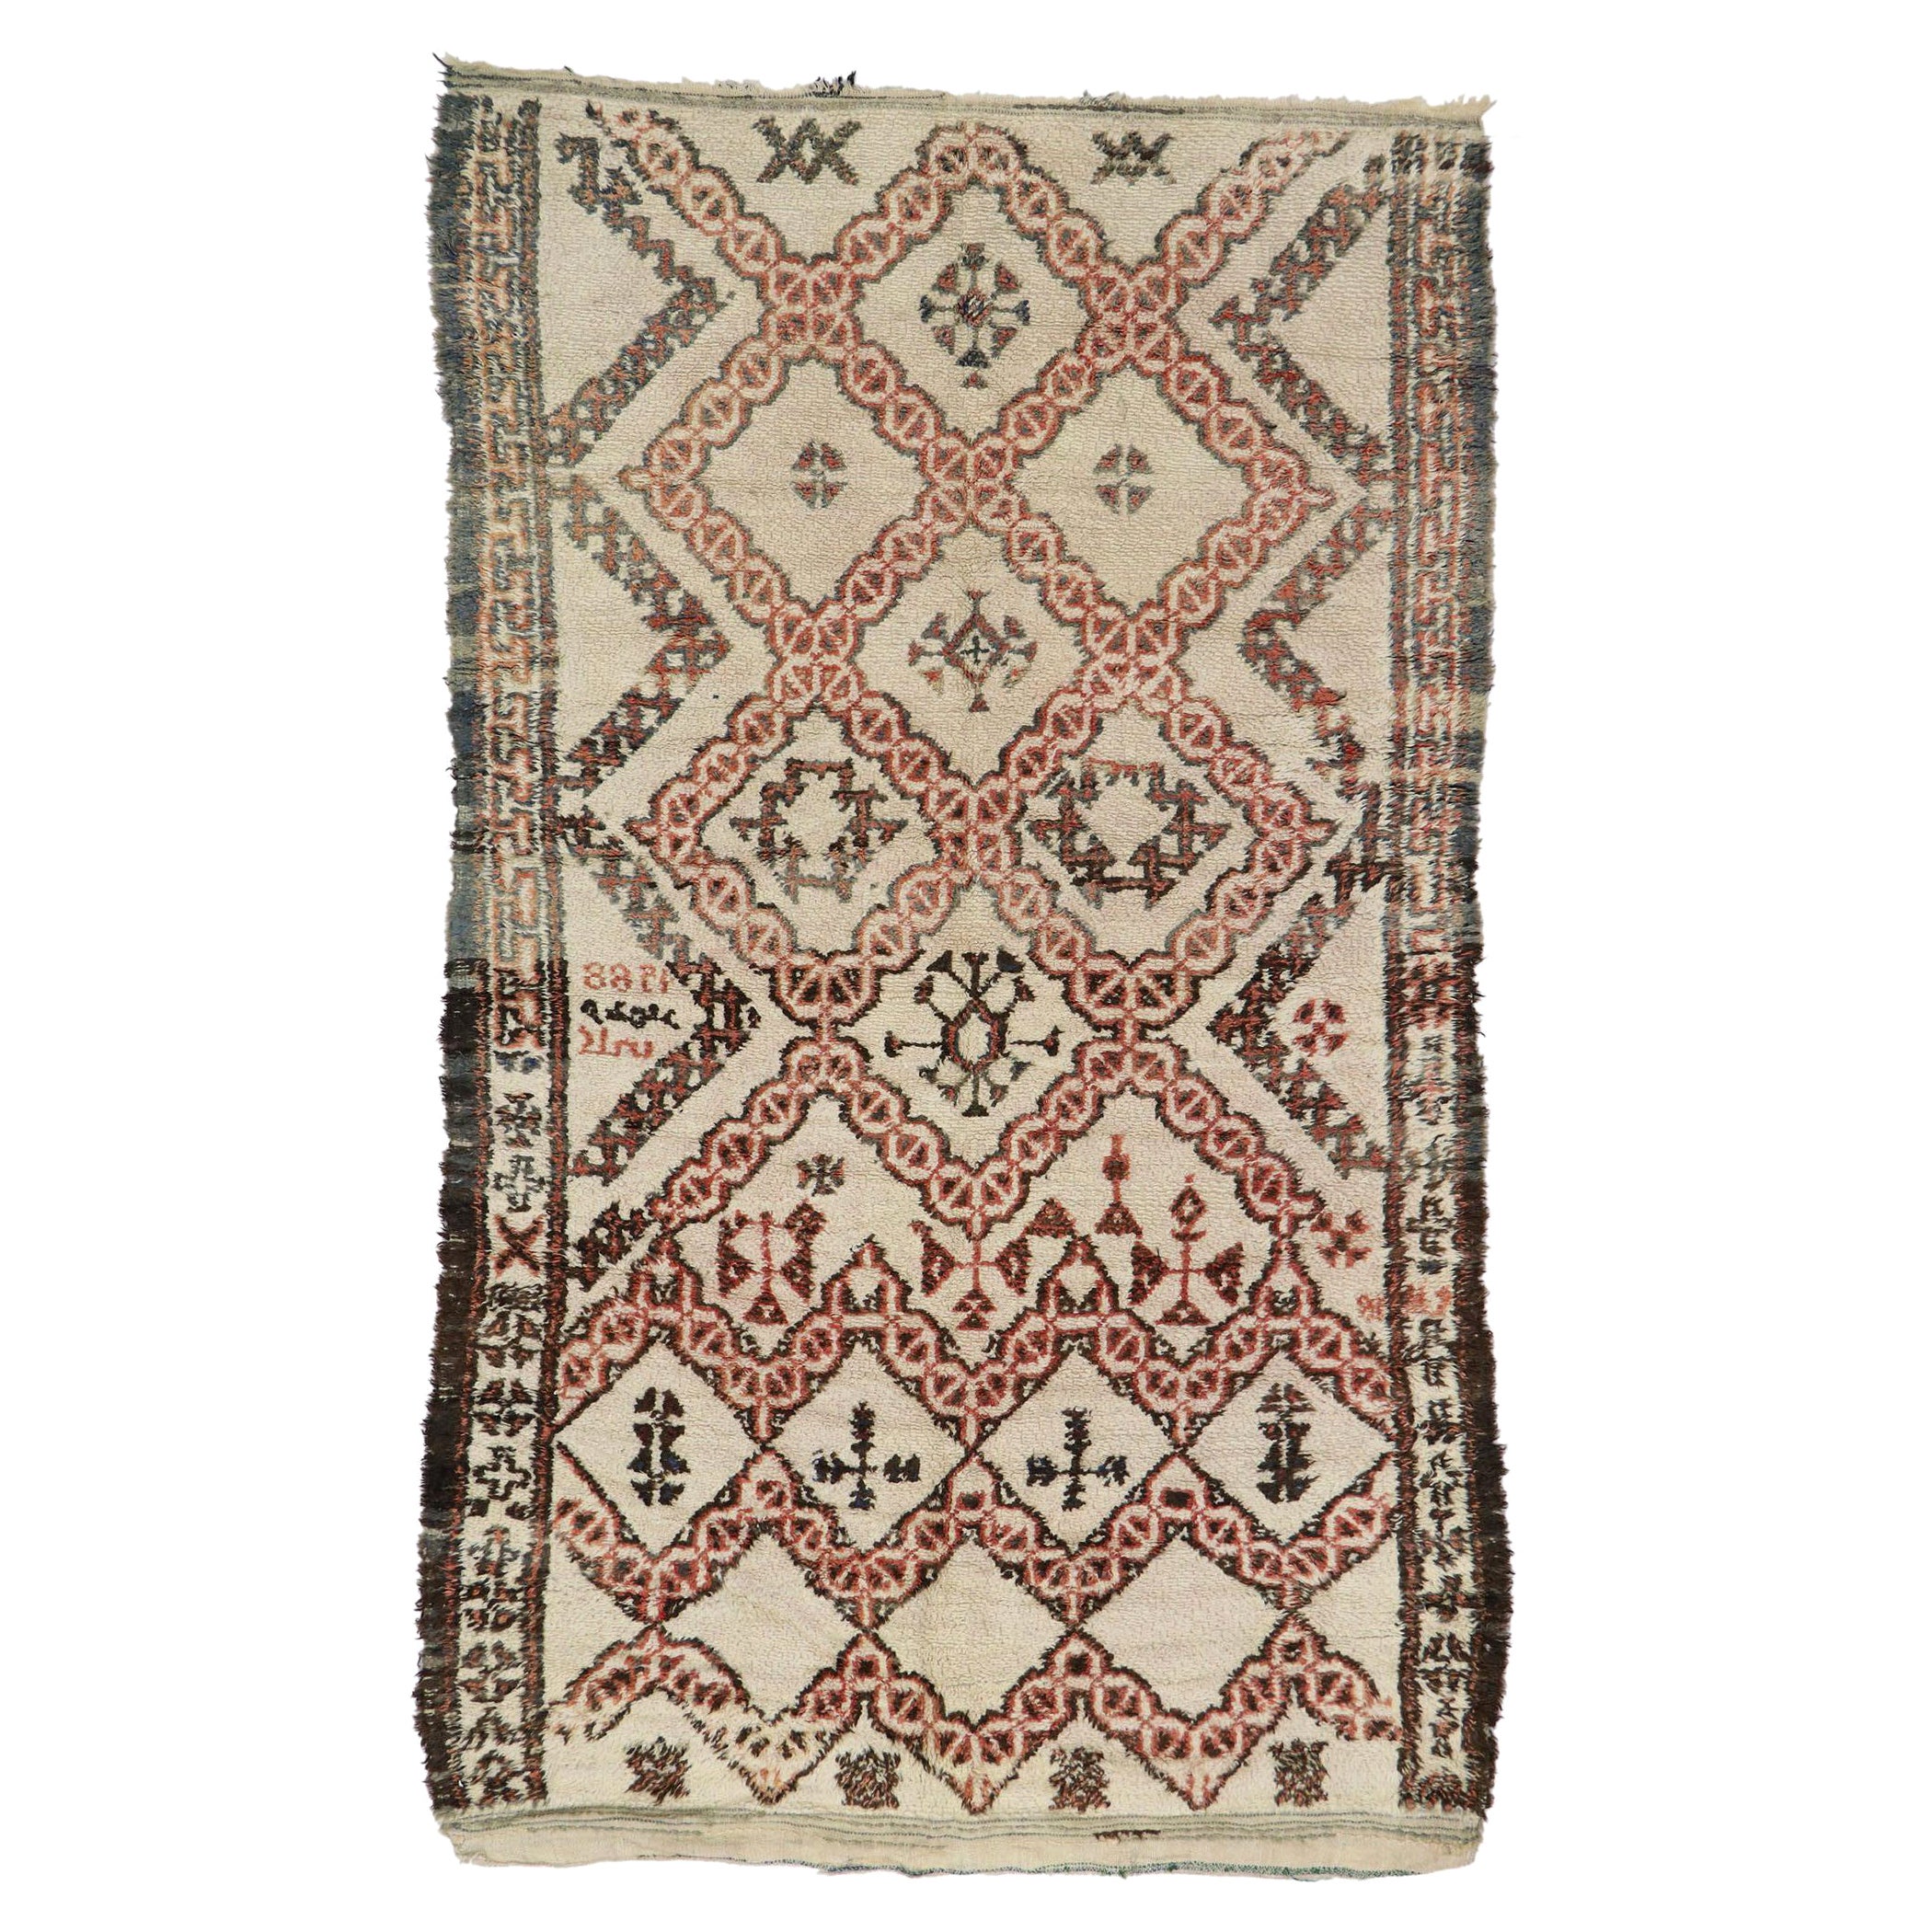 Vintage Moroccan Beni Ourain Rug, Midcentury Modern Meets Tribal Enchantment For Sale